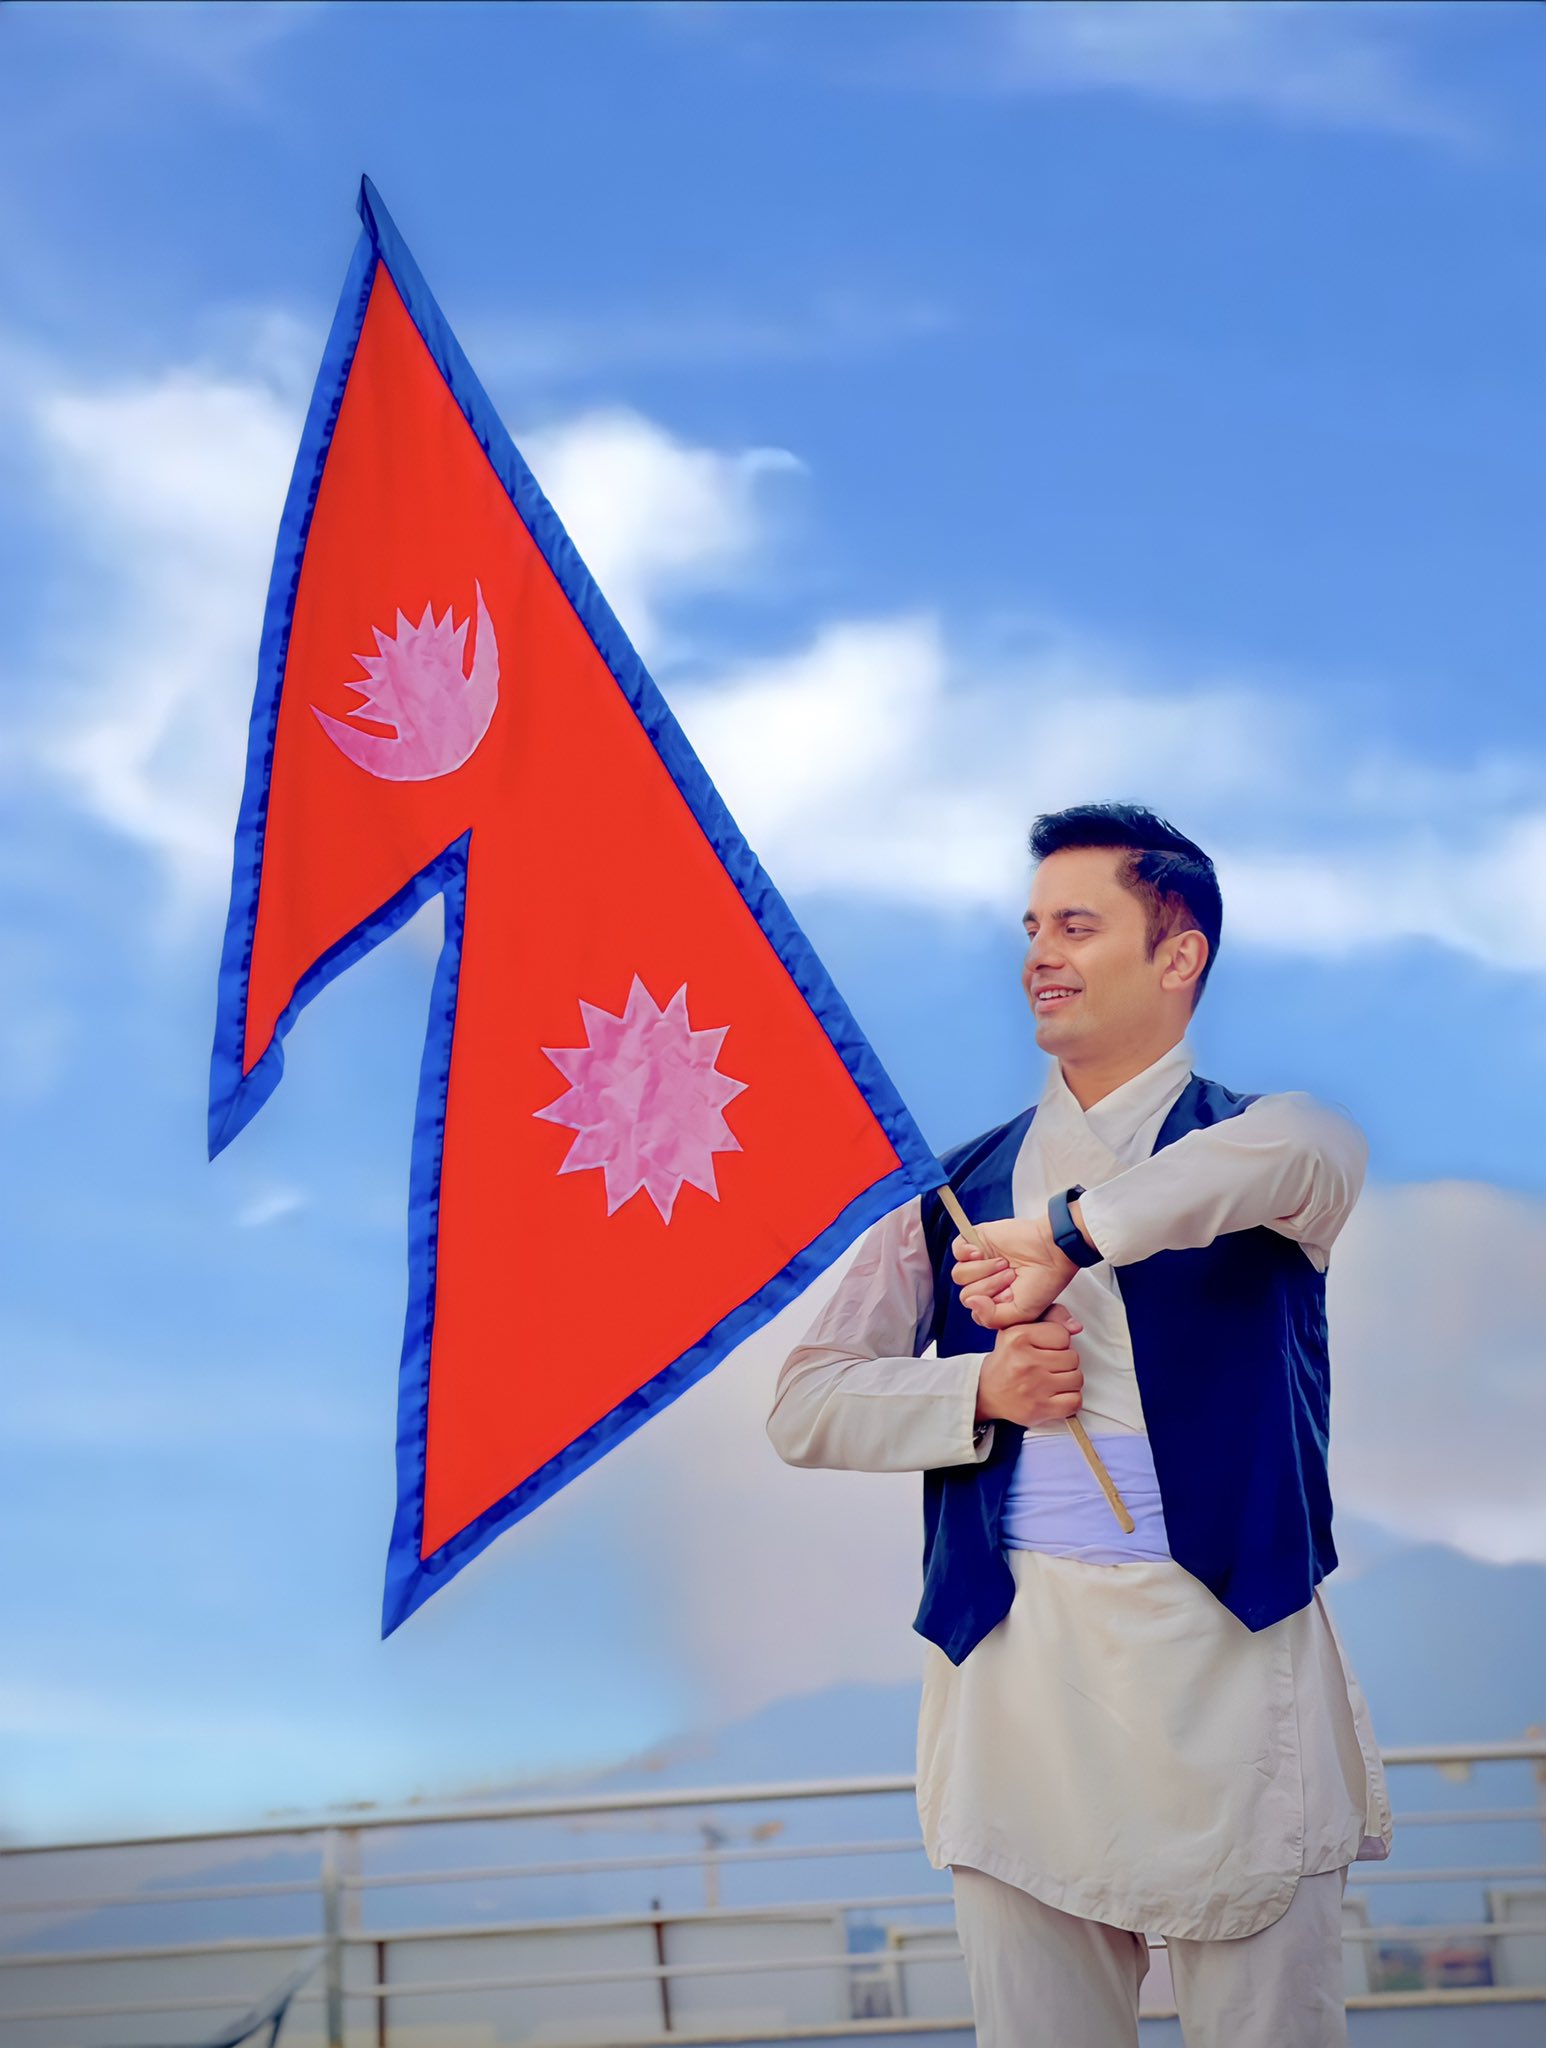 Dr Sandesh Lamsal (in Nepali: डा. सन्देश लम्साल), born on 17th August 1994, in the Dang district of Nepal, is a Nepalese internet celebrity, doctor, sportsman, social media influencer, model and social worker known for his innovative posts on different social media platforms and achievements on his social, professional & public life. Accordingto different sources, Dr Sandesh Lamsal is the First Nepalese Internet Celebrity to be verified on all social media platforms including Google, Yahoo, Bing, Twitter, Amazon, YouTube, Telegram, TikTok, Likee, Moj, Josh, Chingari, Tiki, Huut and Vero app in 2022. He is also considered the Most Stunning Nepali Man by different news sources, on the basis of his astonishing social media posts, bold character and hot photographs found on the internet.